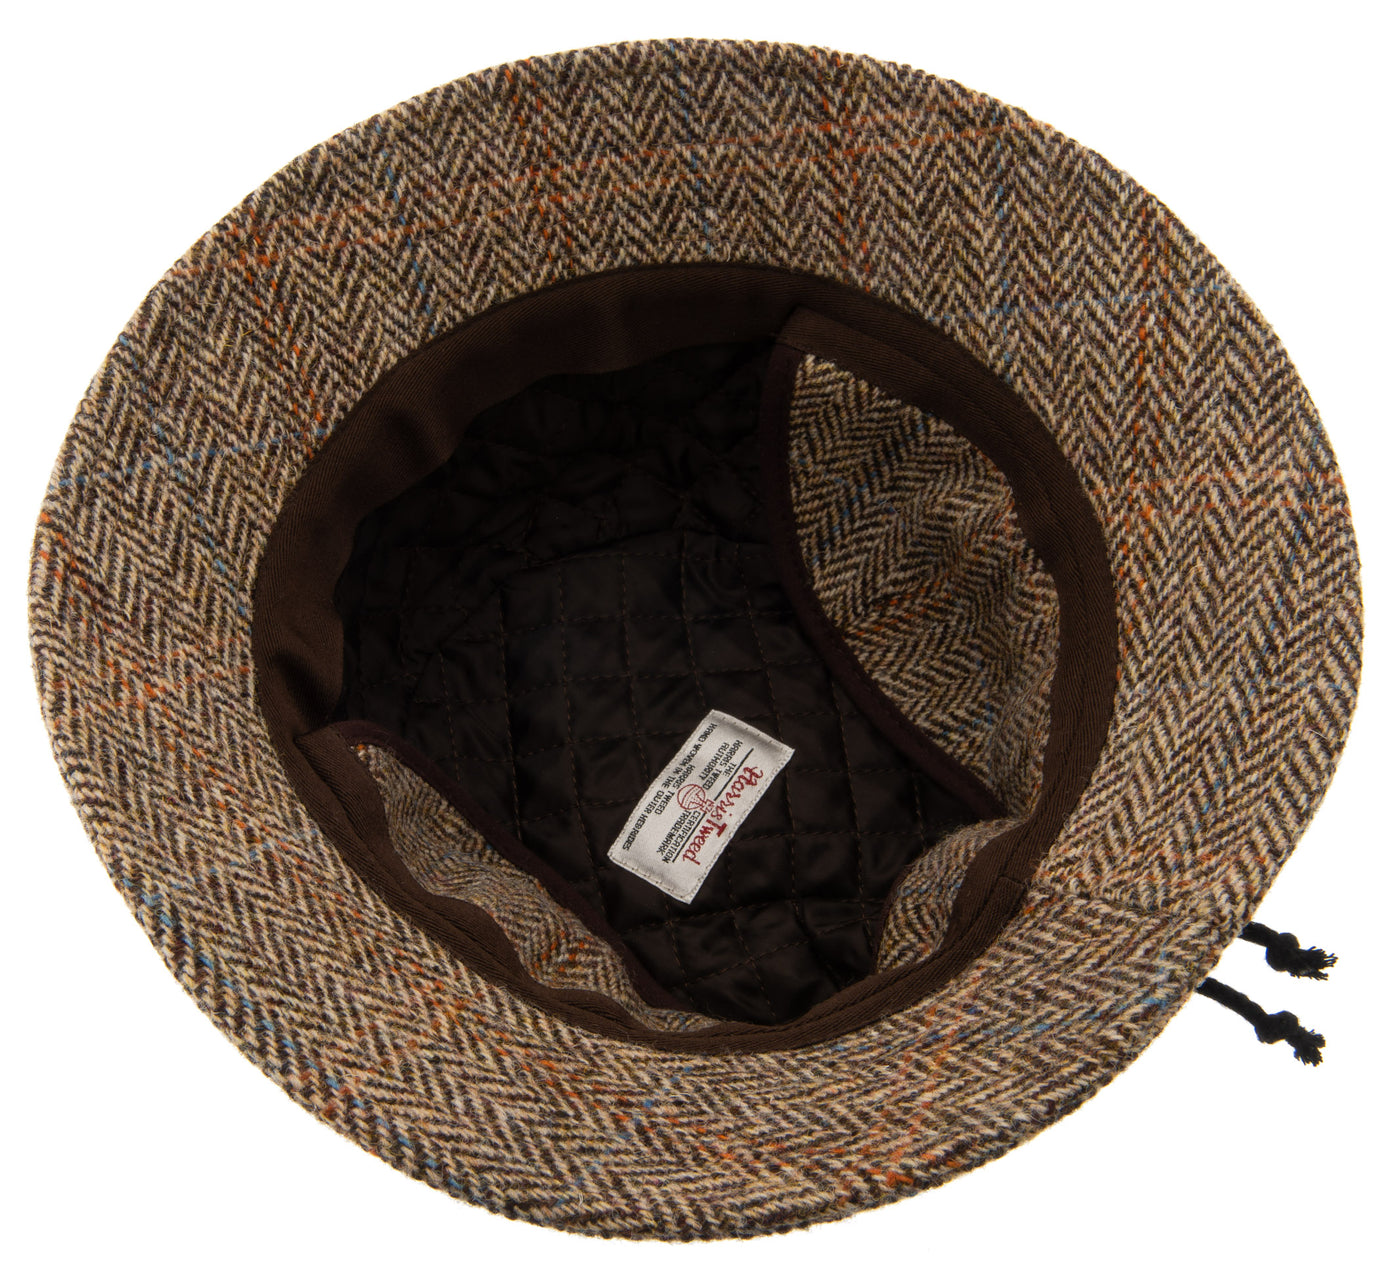 Brown Harris Tweed Walking hat, Grouse hat, fold-down ear patches 